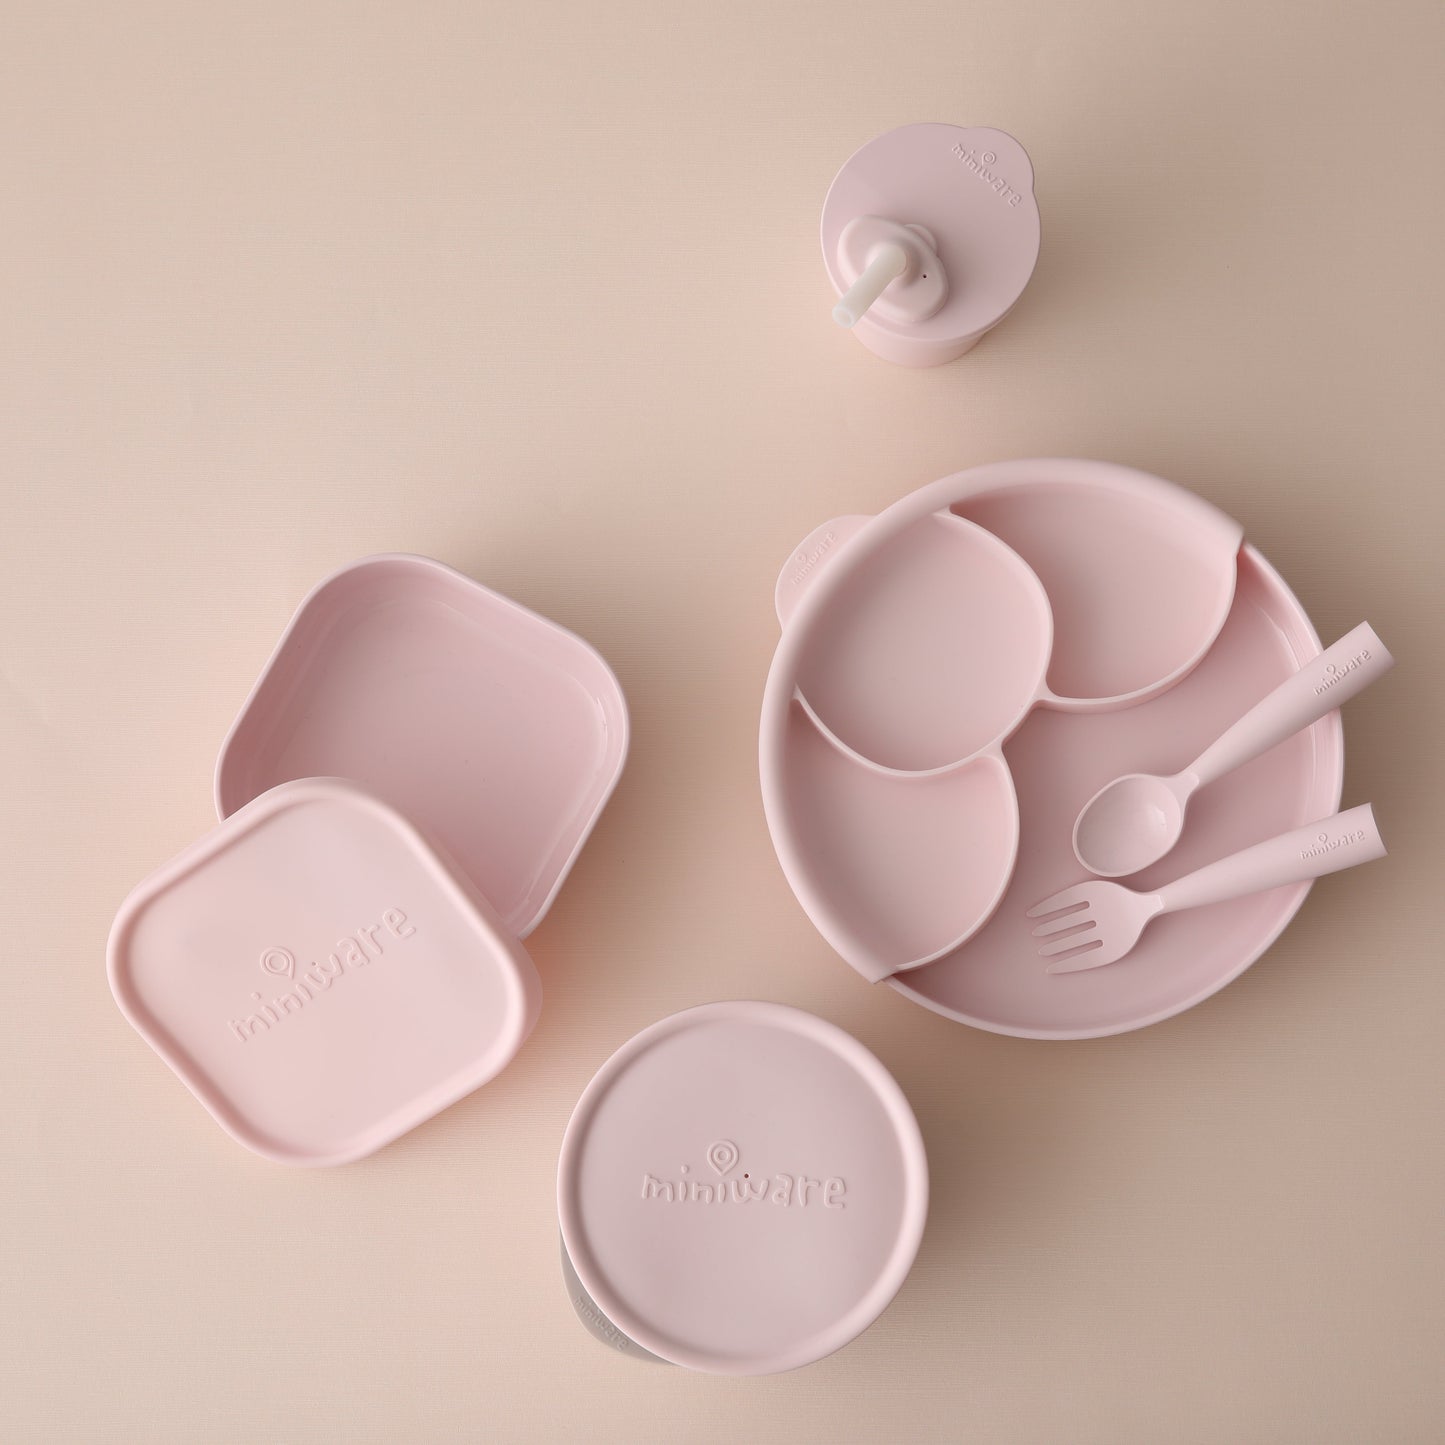 Healthy Meal Set - Menüteller (Cotton Candy/Cotton Candy)